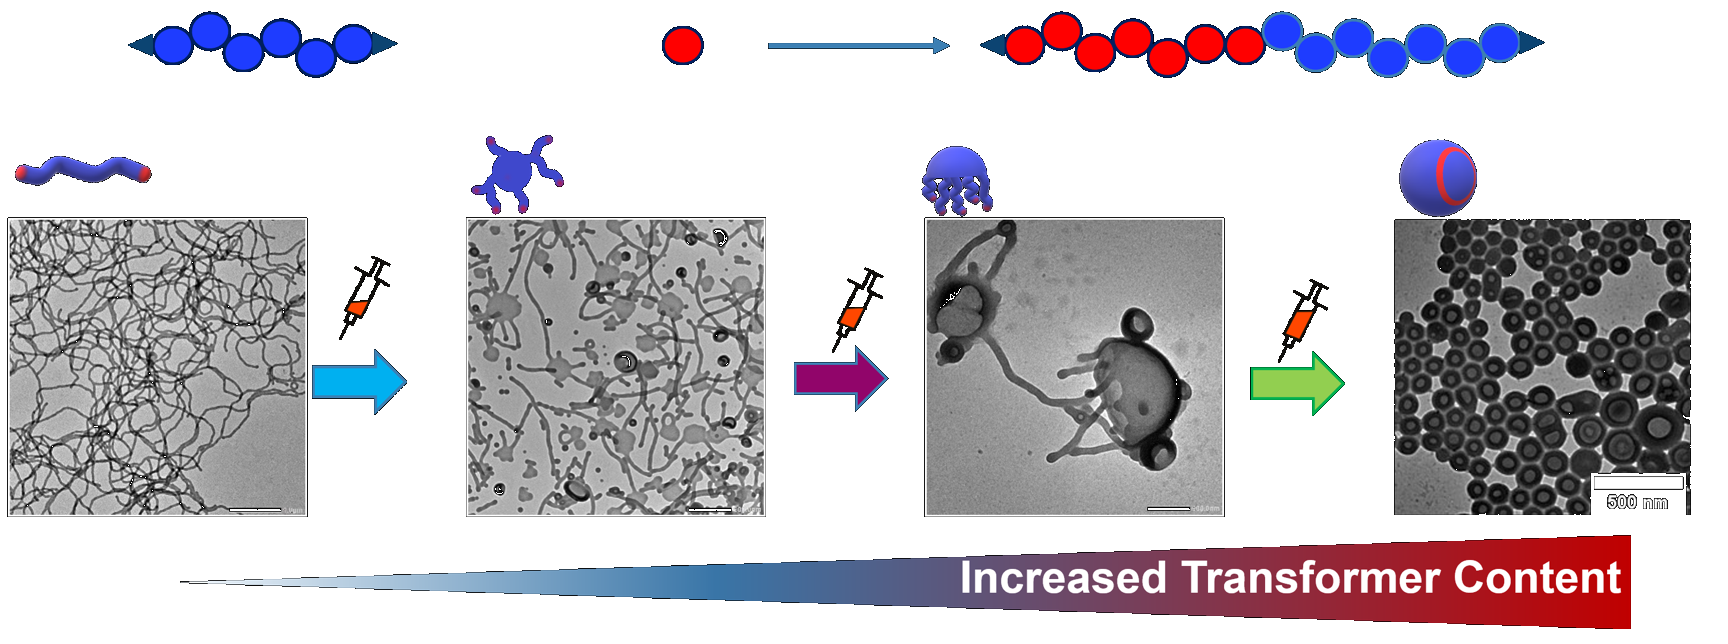 Transformer-​Induced Metamorphosis of Polymeric Nanoparticle Shape at Room Temperature